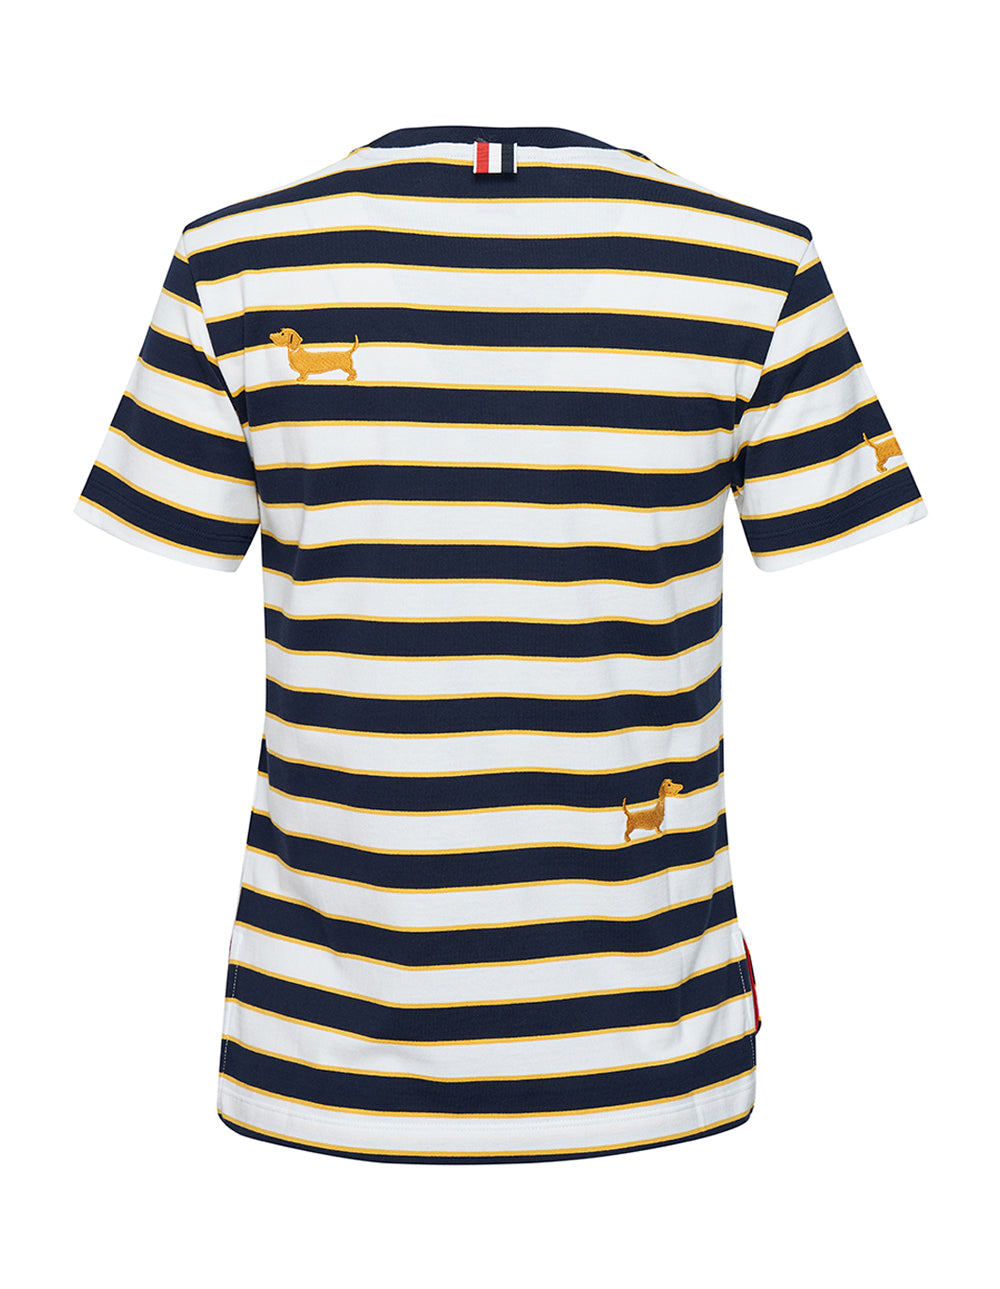 Thom Browne Embroidered Hector Icons Rep Stripe Tee Navy 2